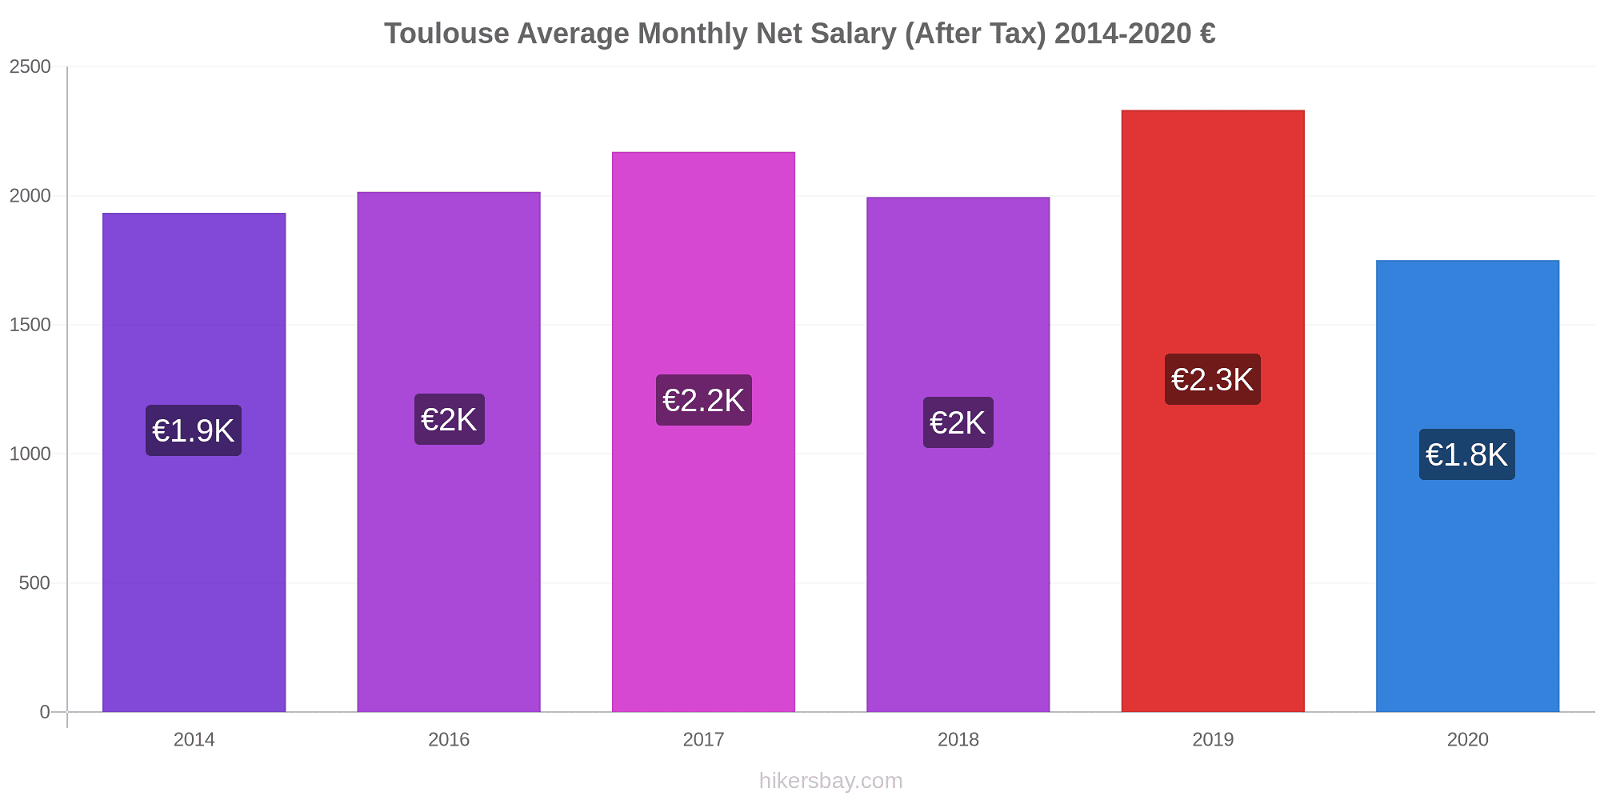 Toulouse price changes Average Monthly Net Salary (After Tax) hikersbay.com